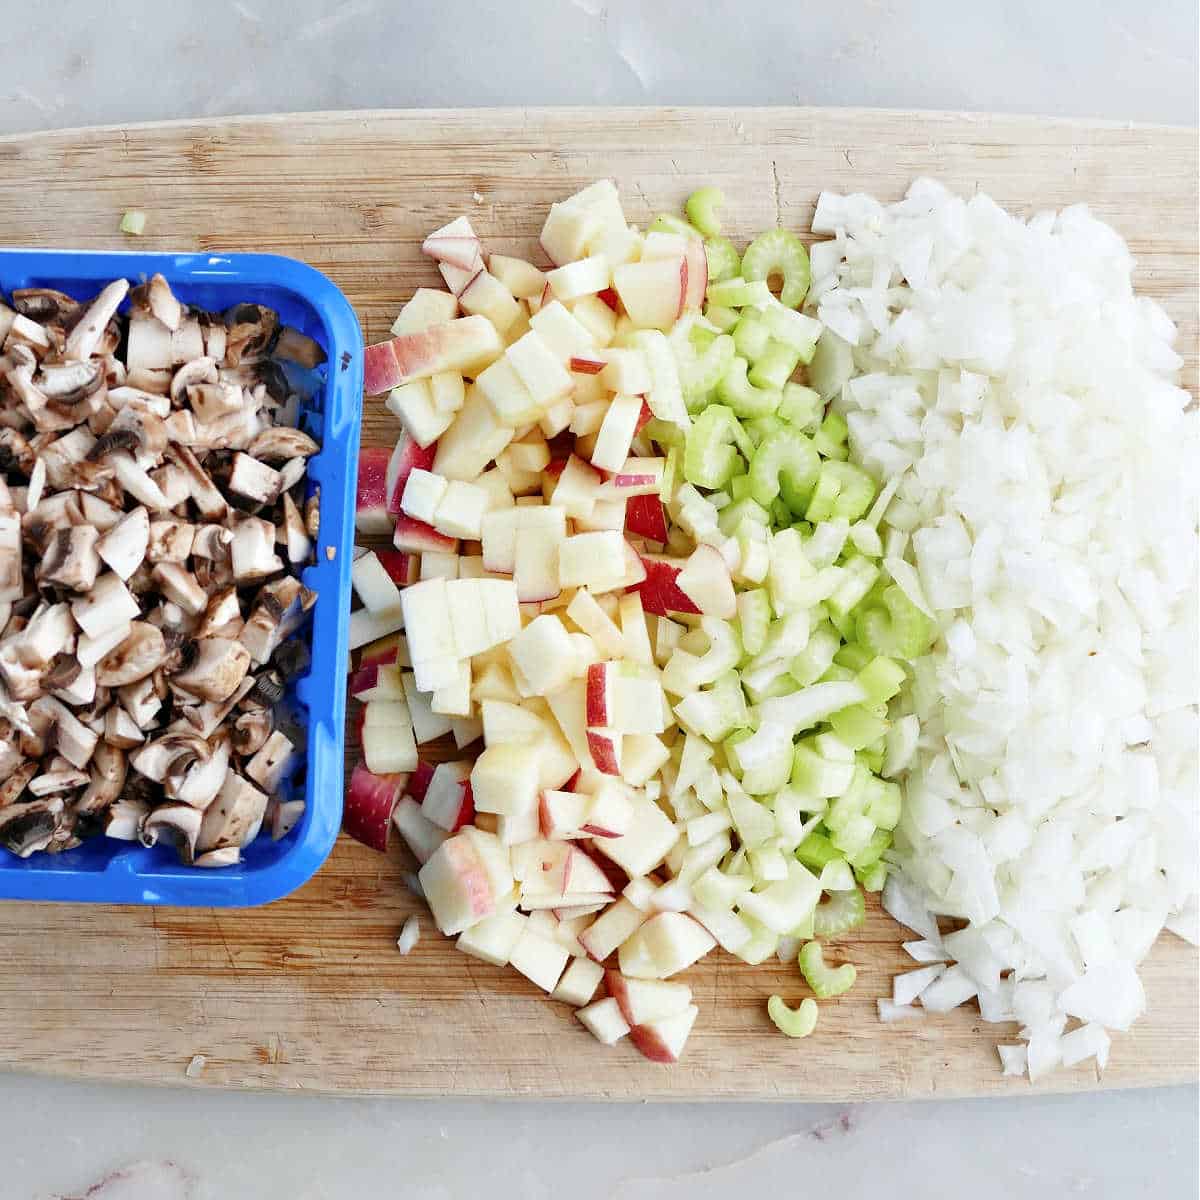 diced mushrooms, apples, celery, and onion next to each other on a cutting board